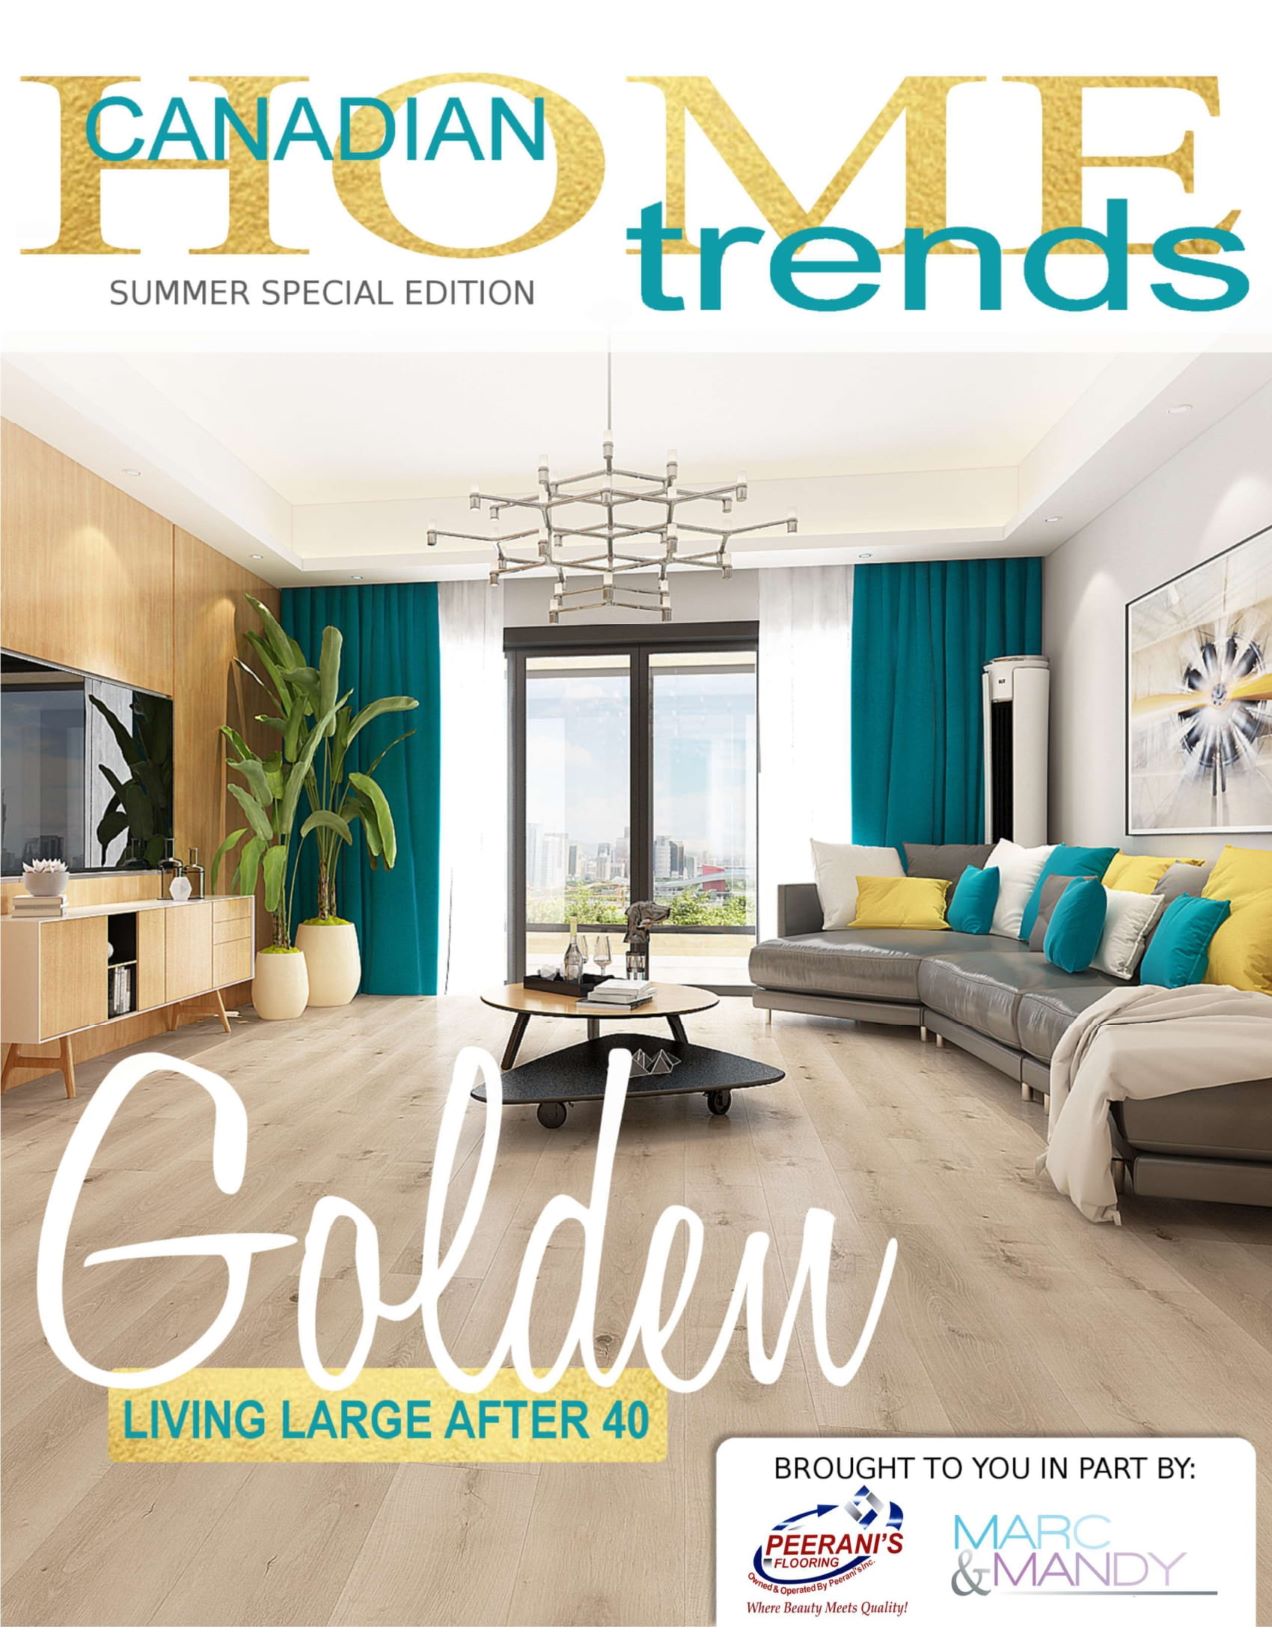 Canadian Home Trends Golden Living Edition